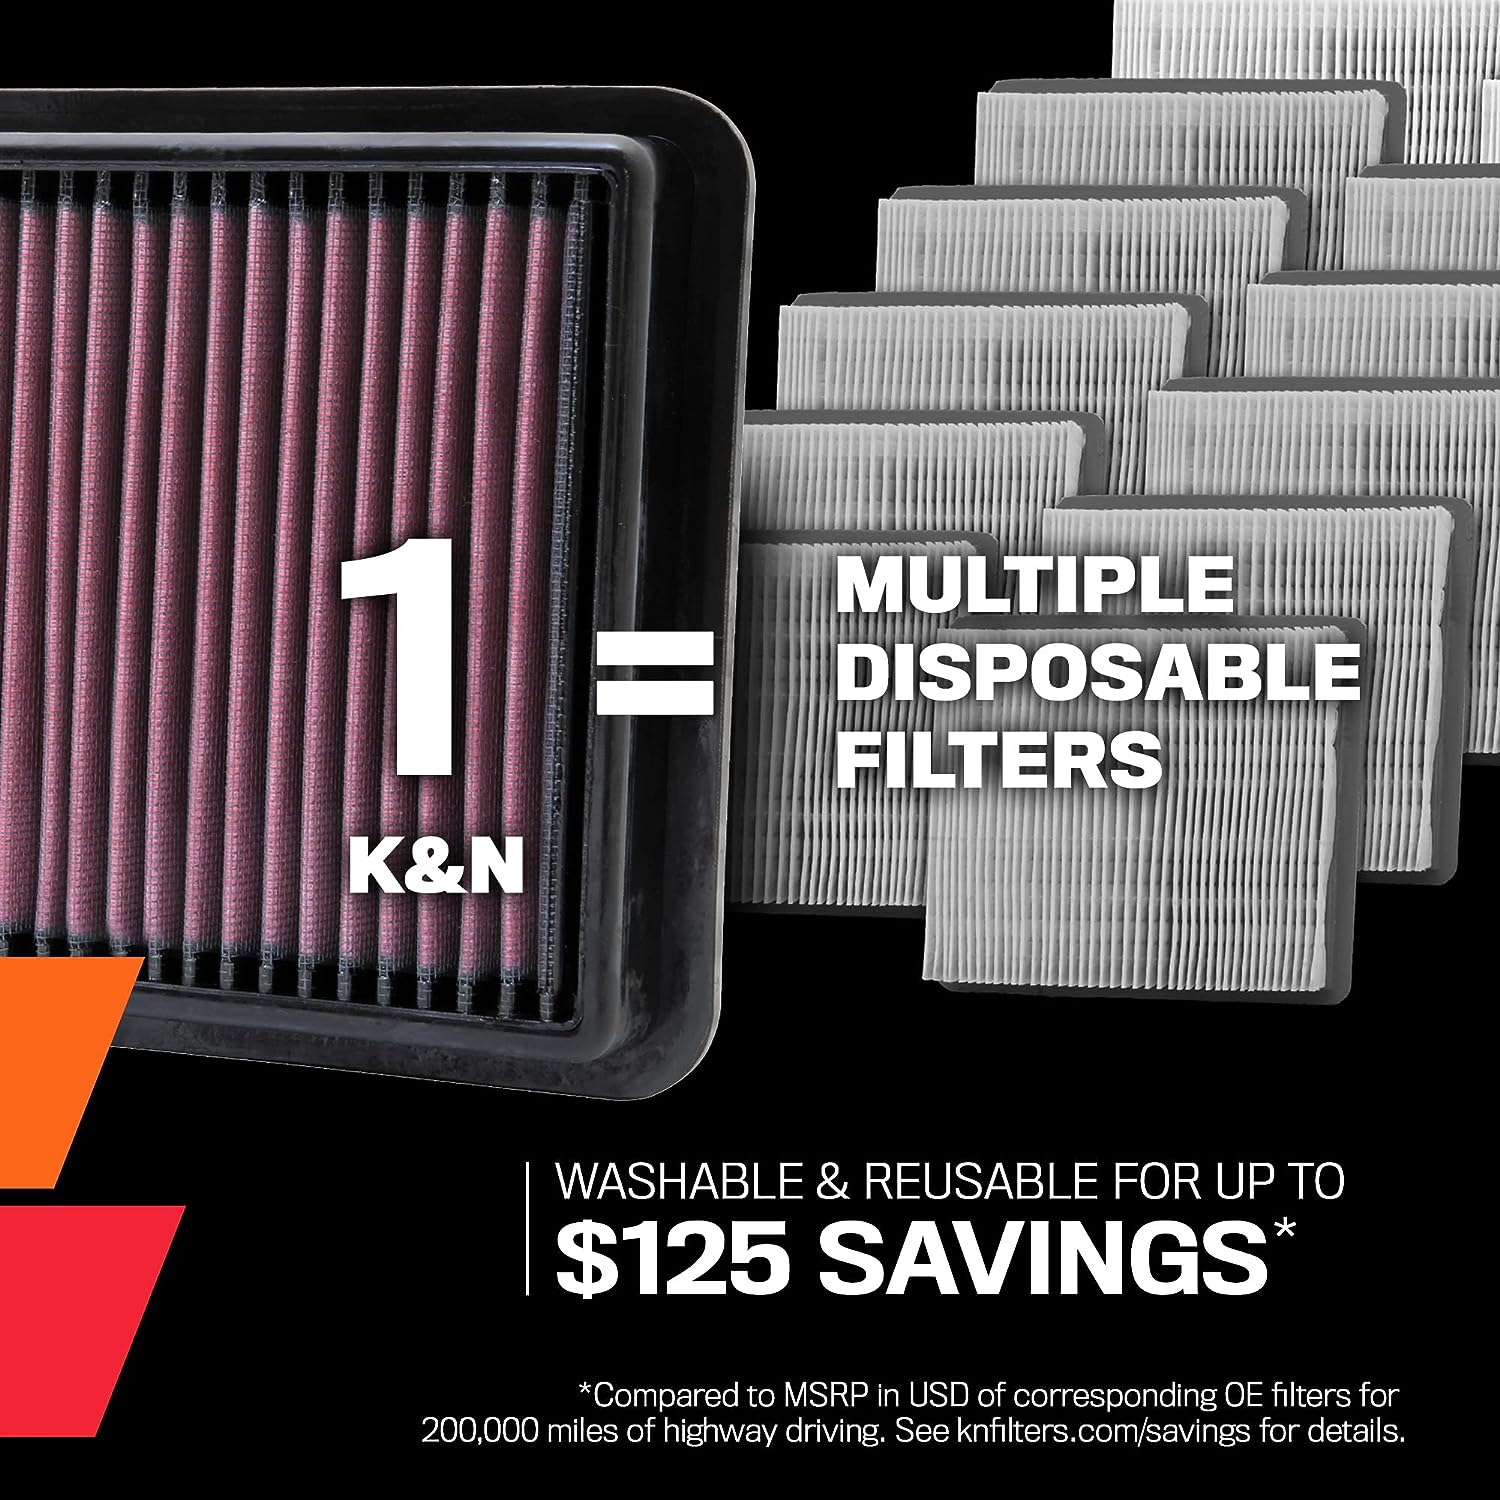 K&N Engine Air Filter: Increase Power & Acceleration, Washable, Premium, Replacement Car Air Filter: Compatible with 2015-2019 Mazda/Fiat L4 (MX-5 Miata, Mx-5, MX-5 IV, Roadster, 124 Spider), 33-5040